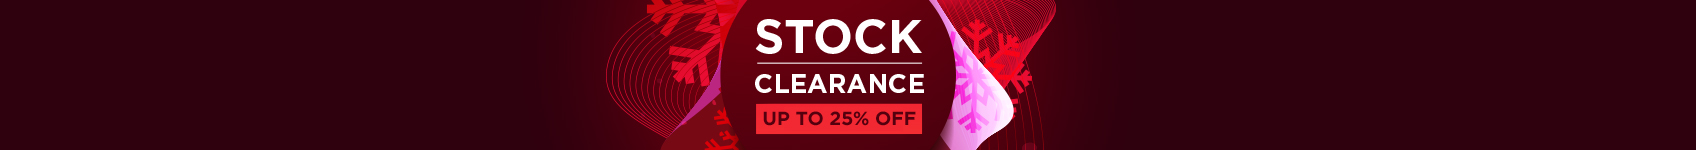 Wex Photo Video Stock Clearance